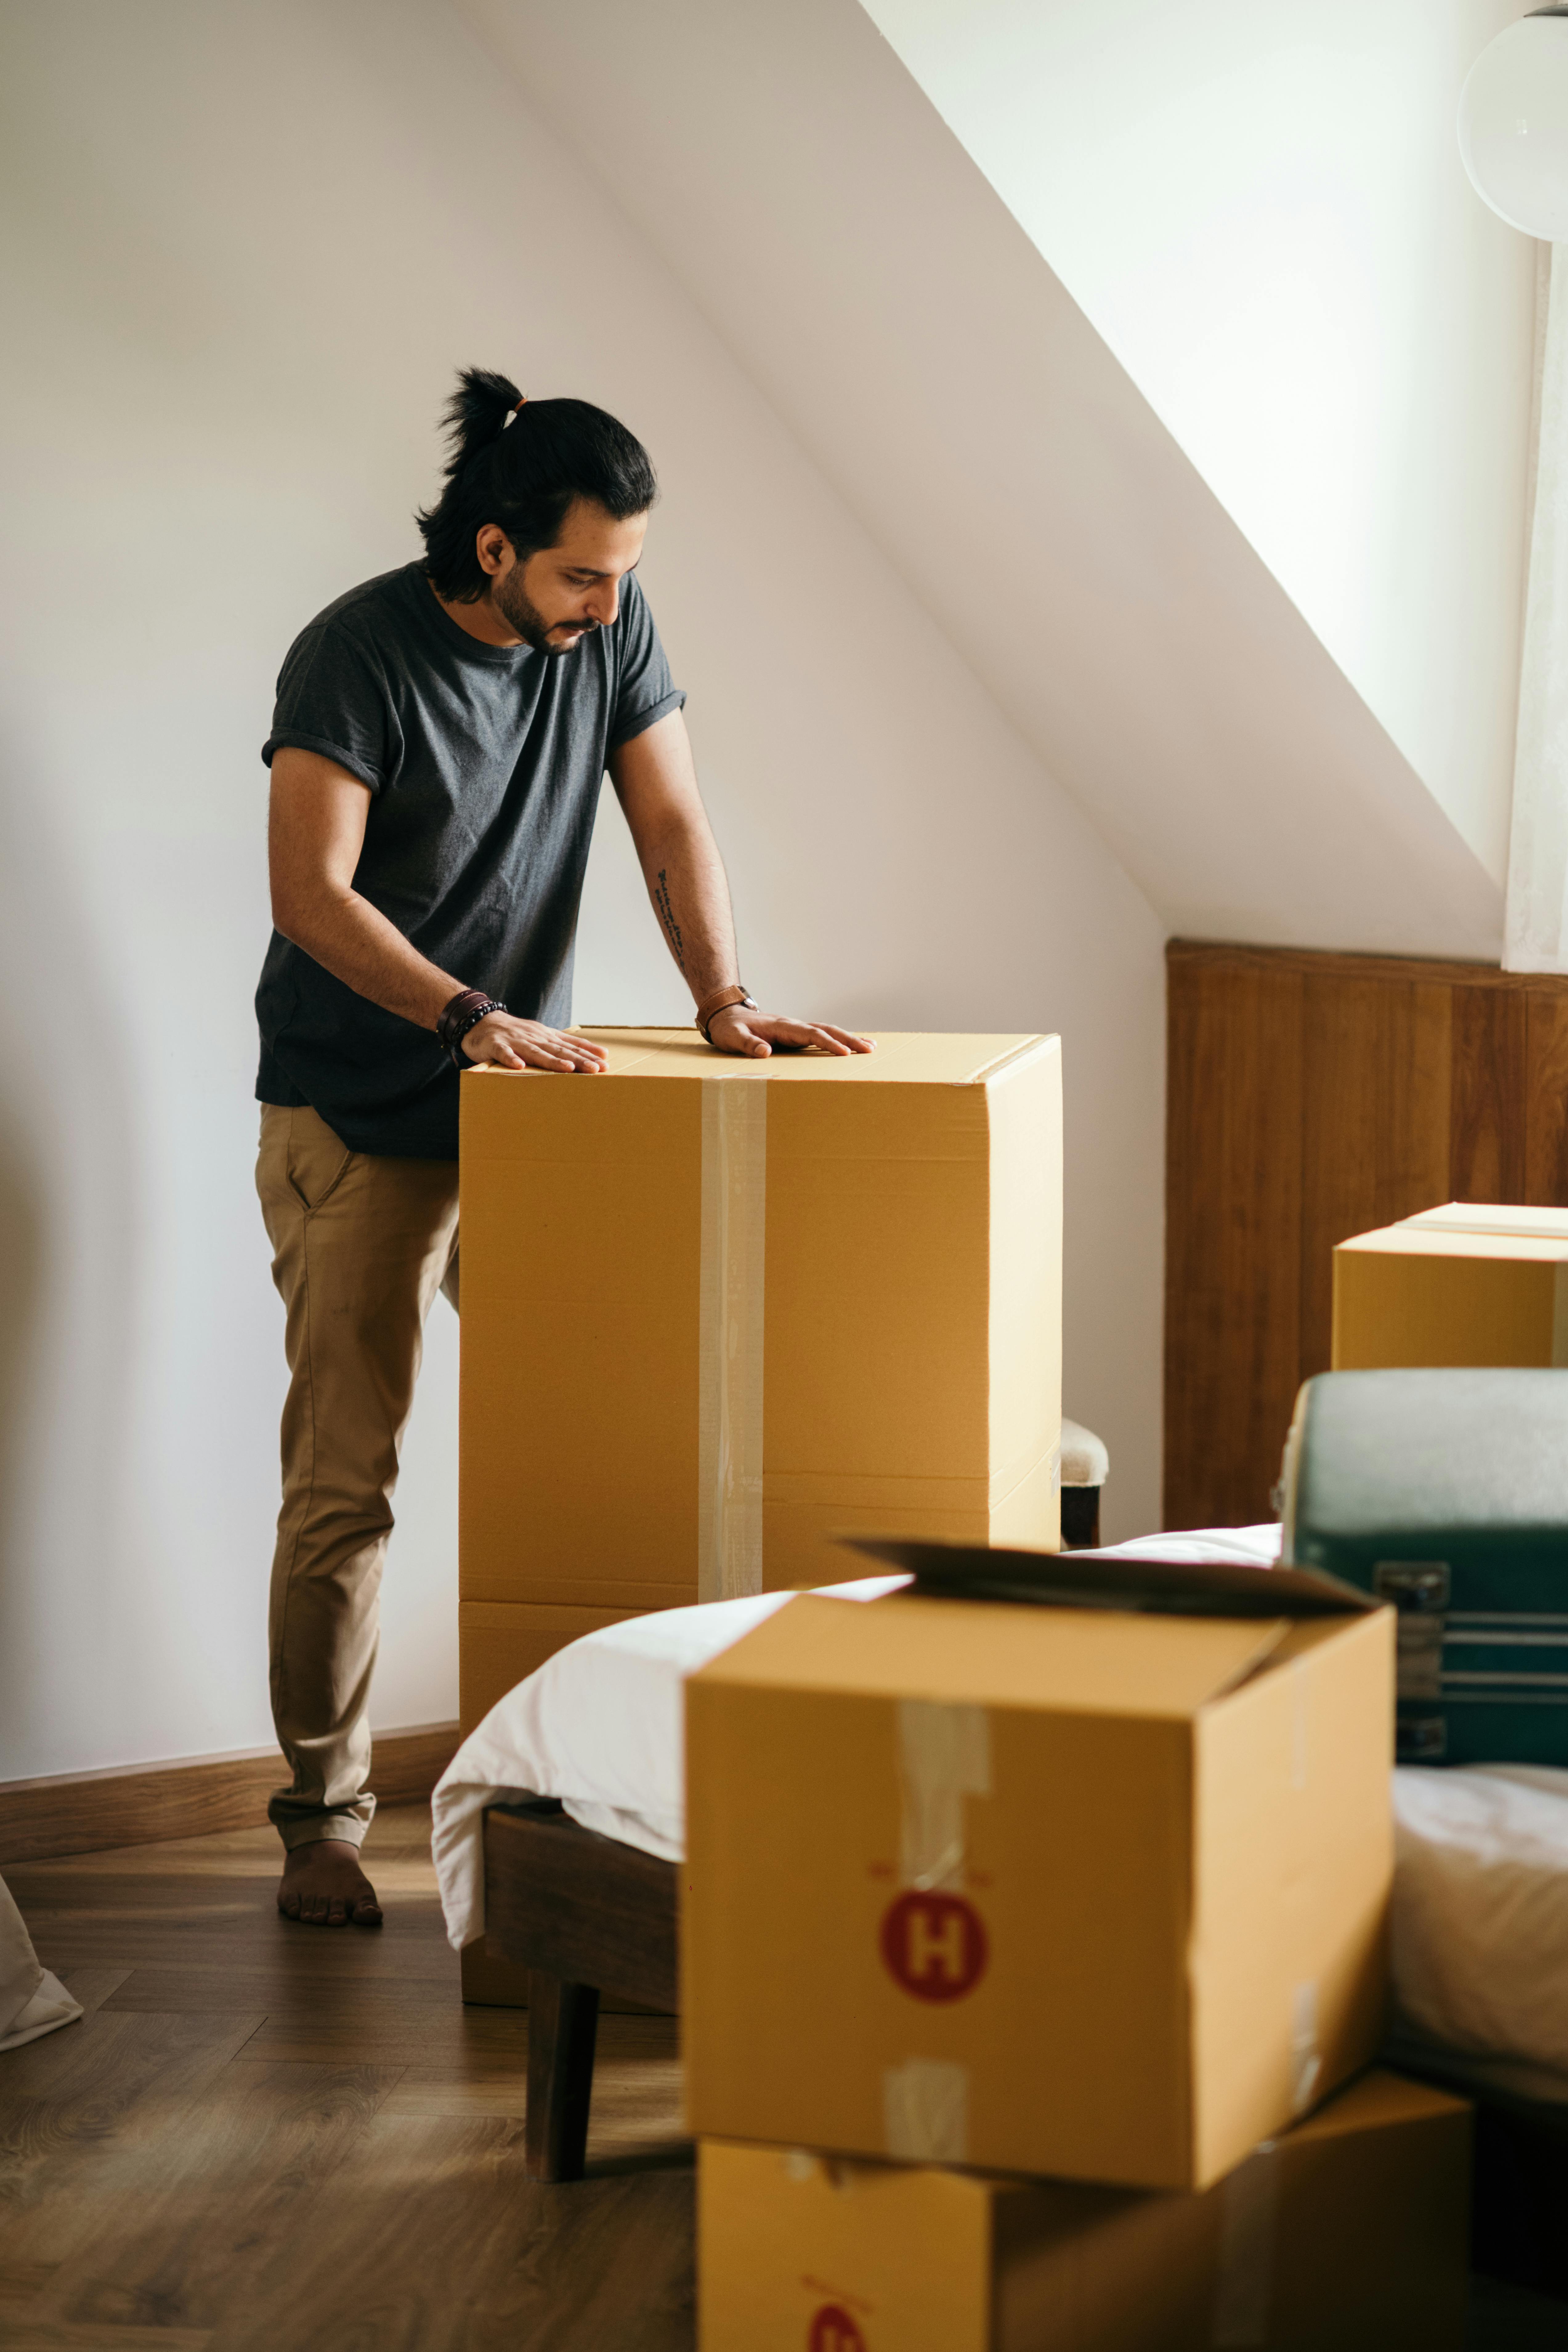 A man packing his things into boxes | Source: Pexels